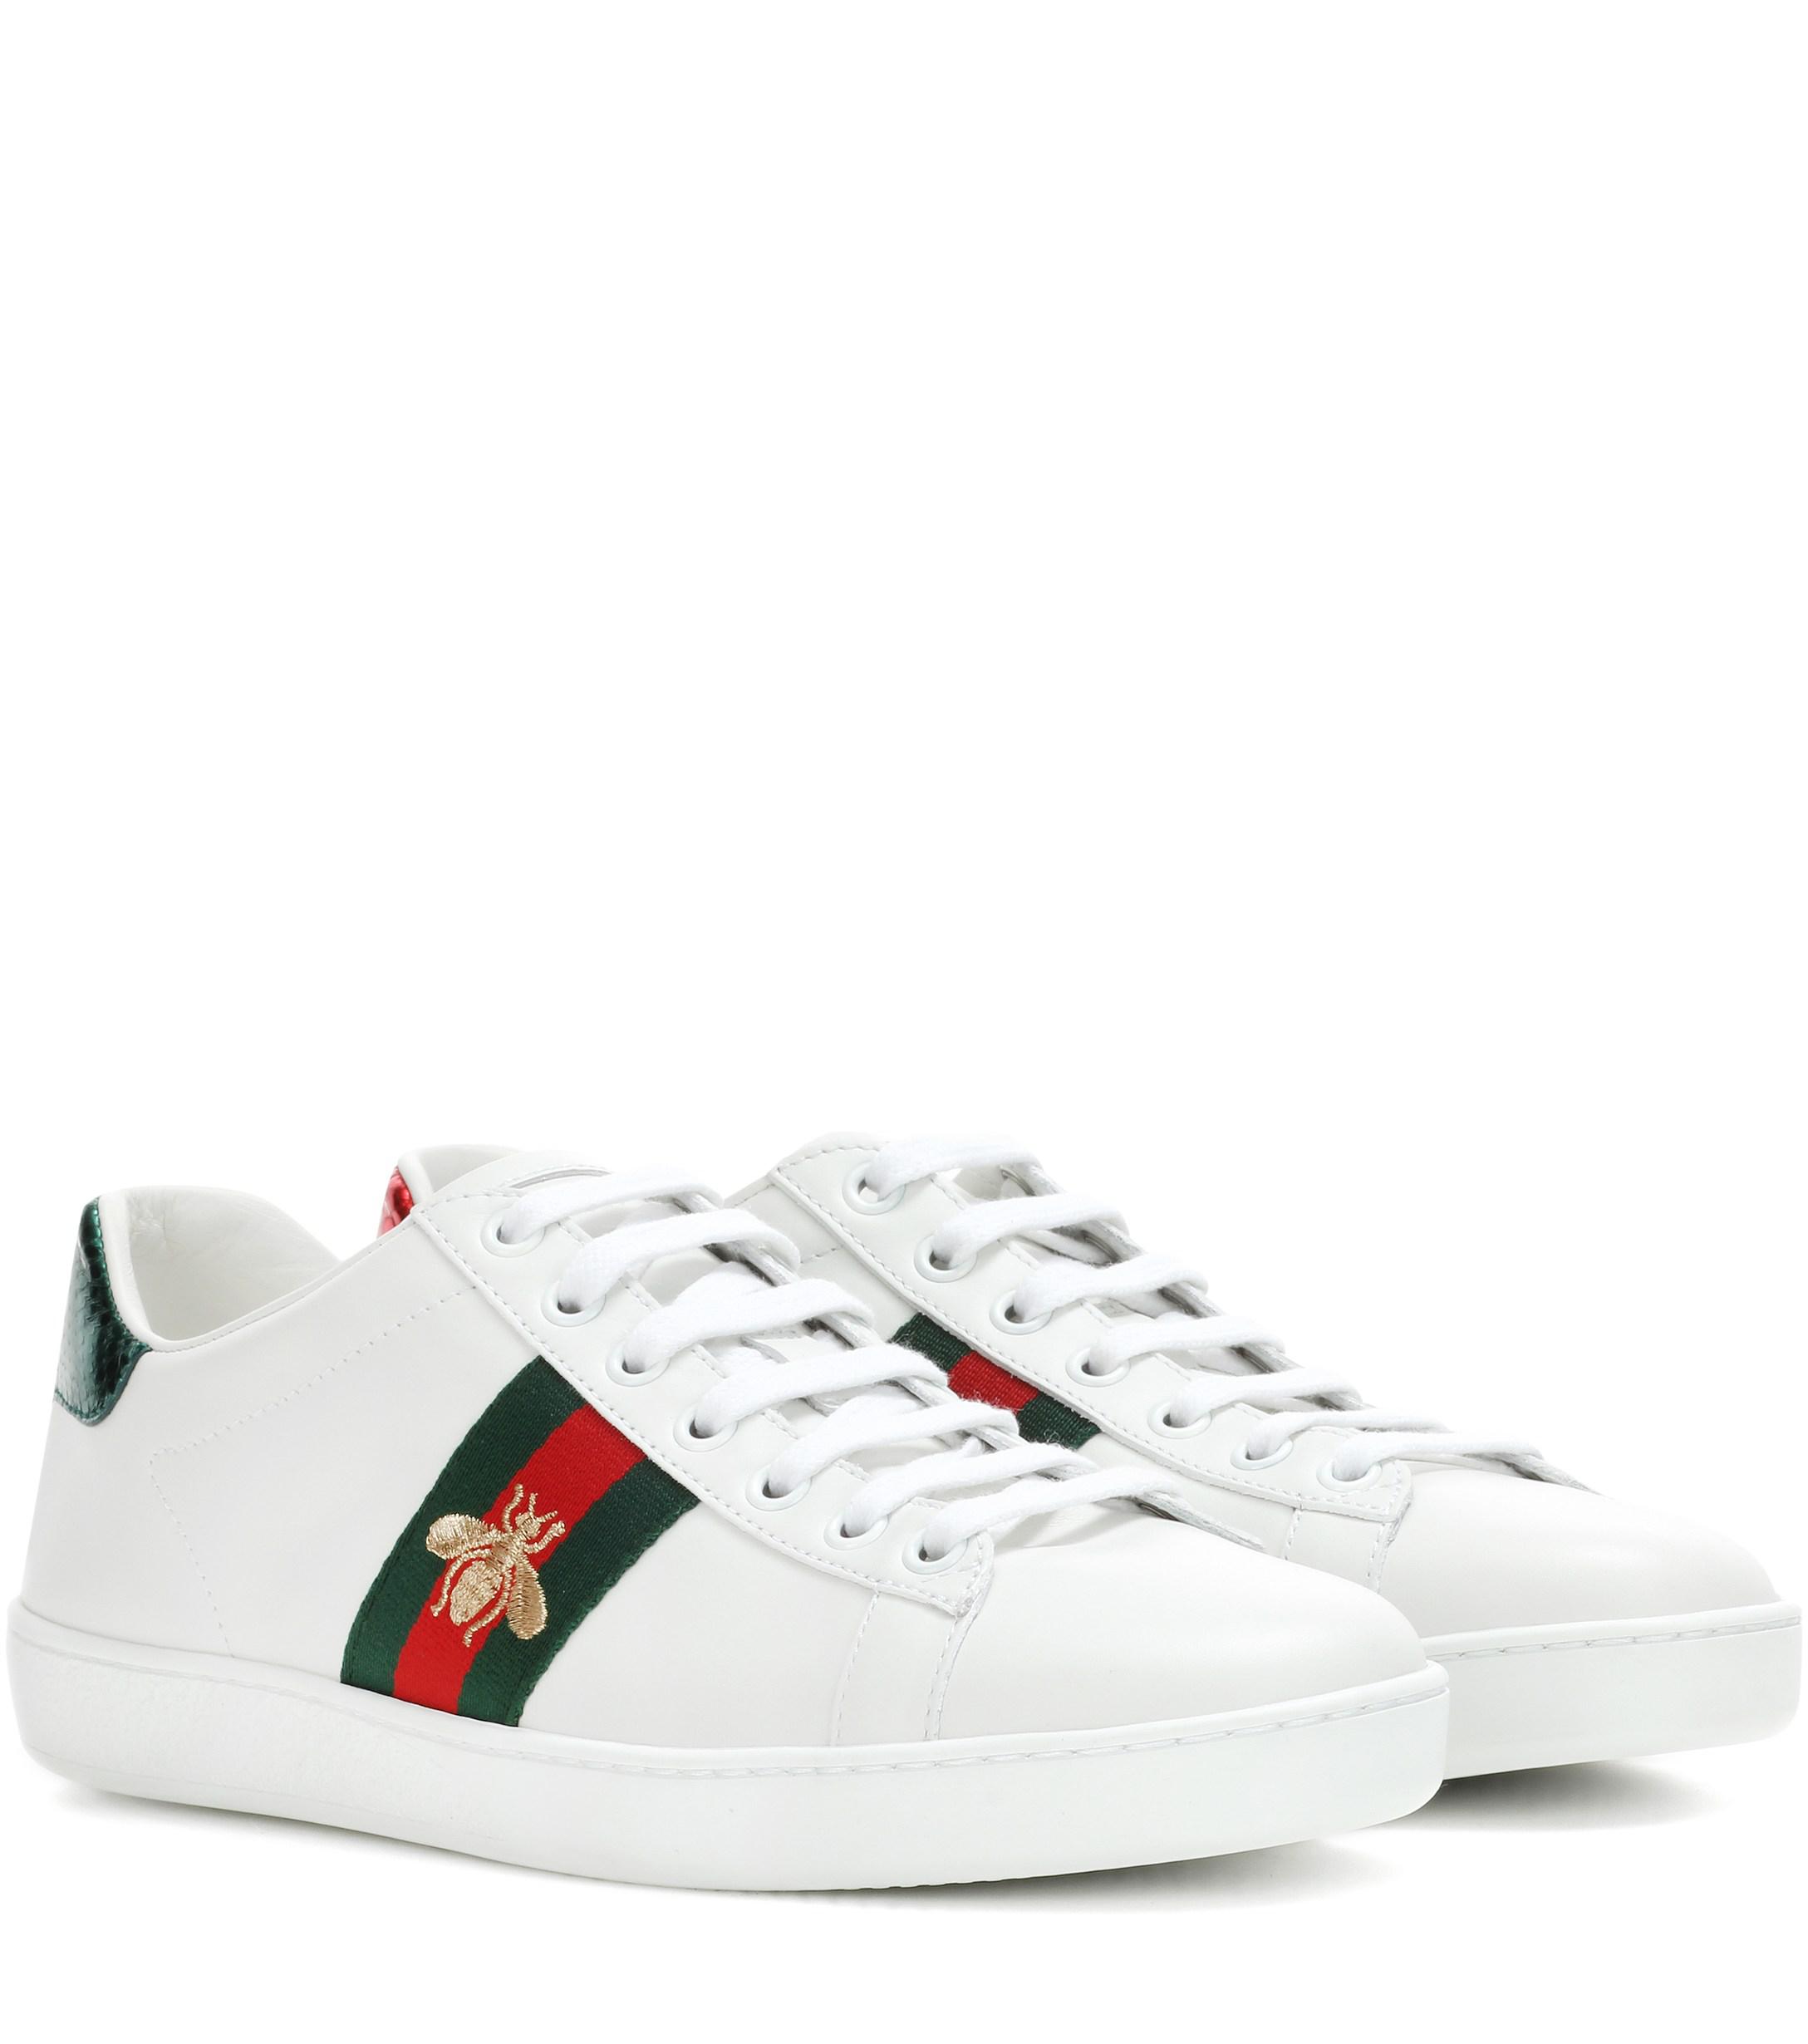 Gucci Ace Leather Sneakers - Lyst